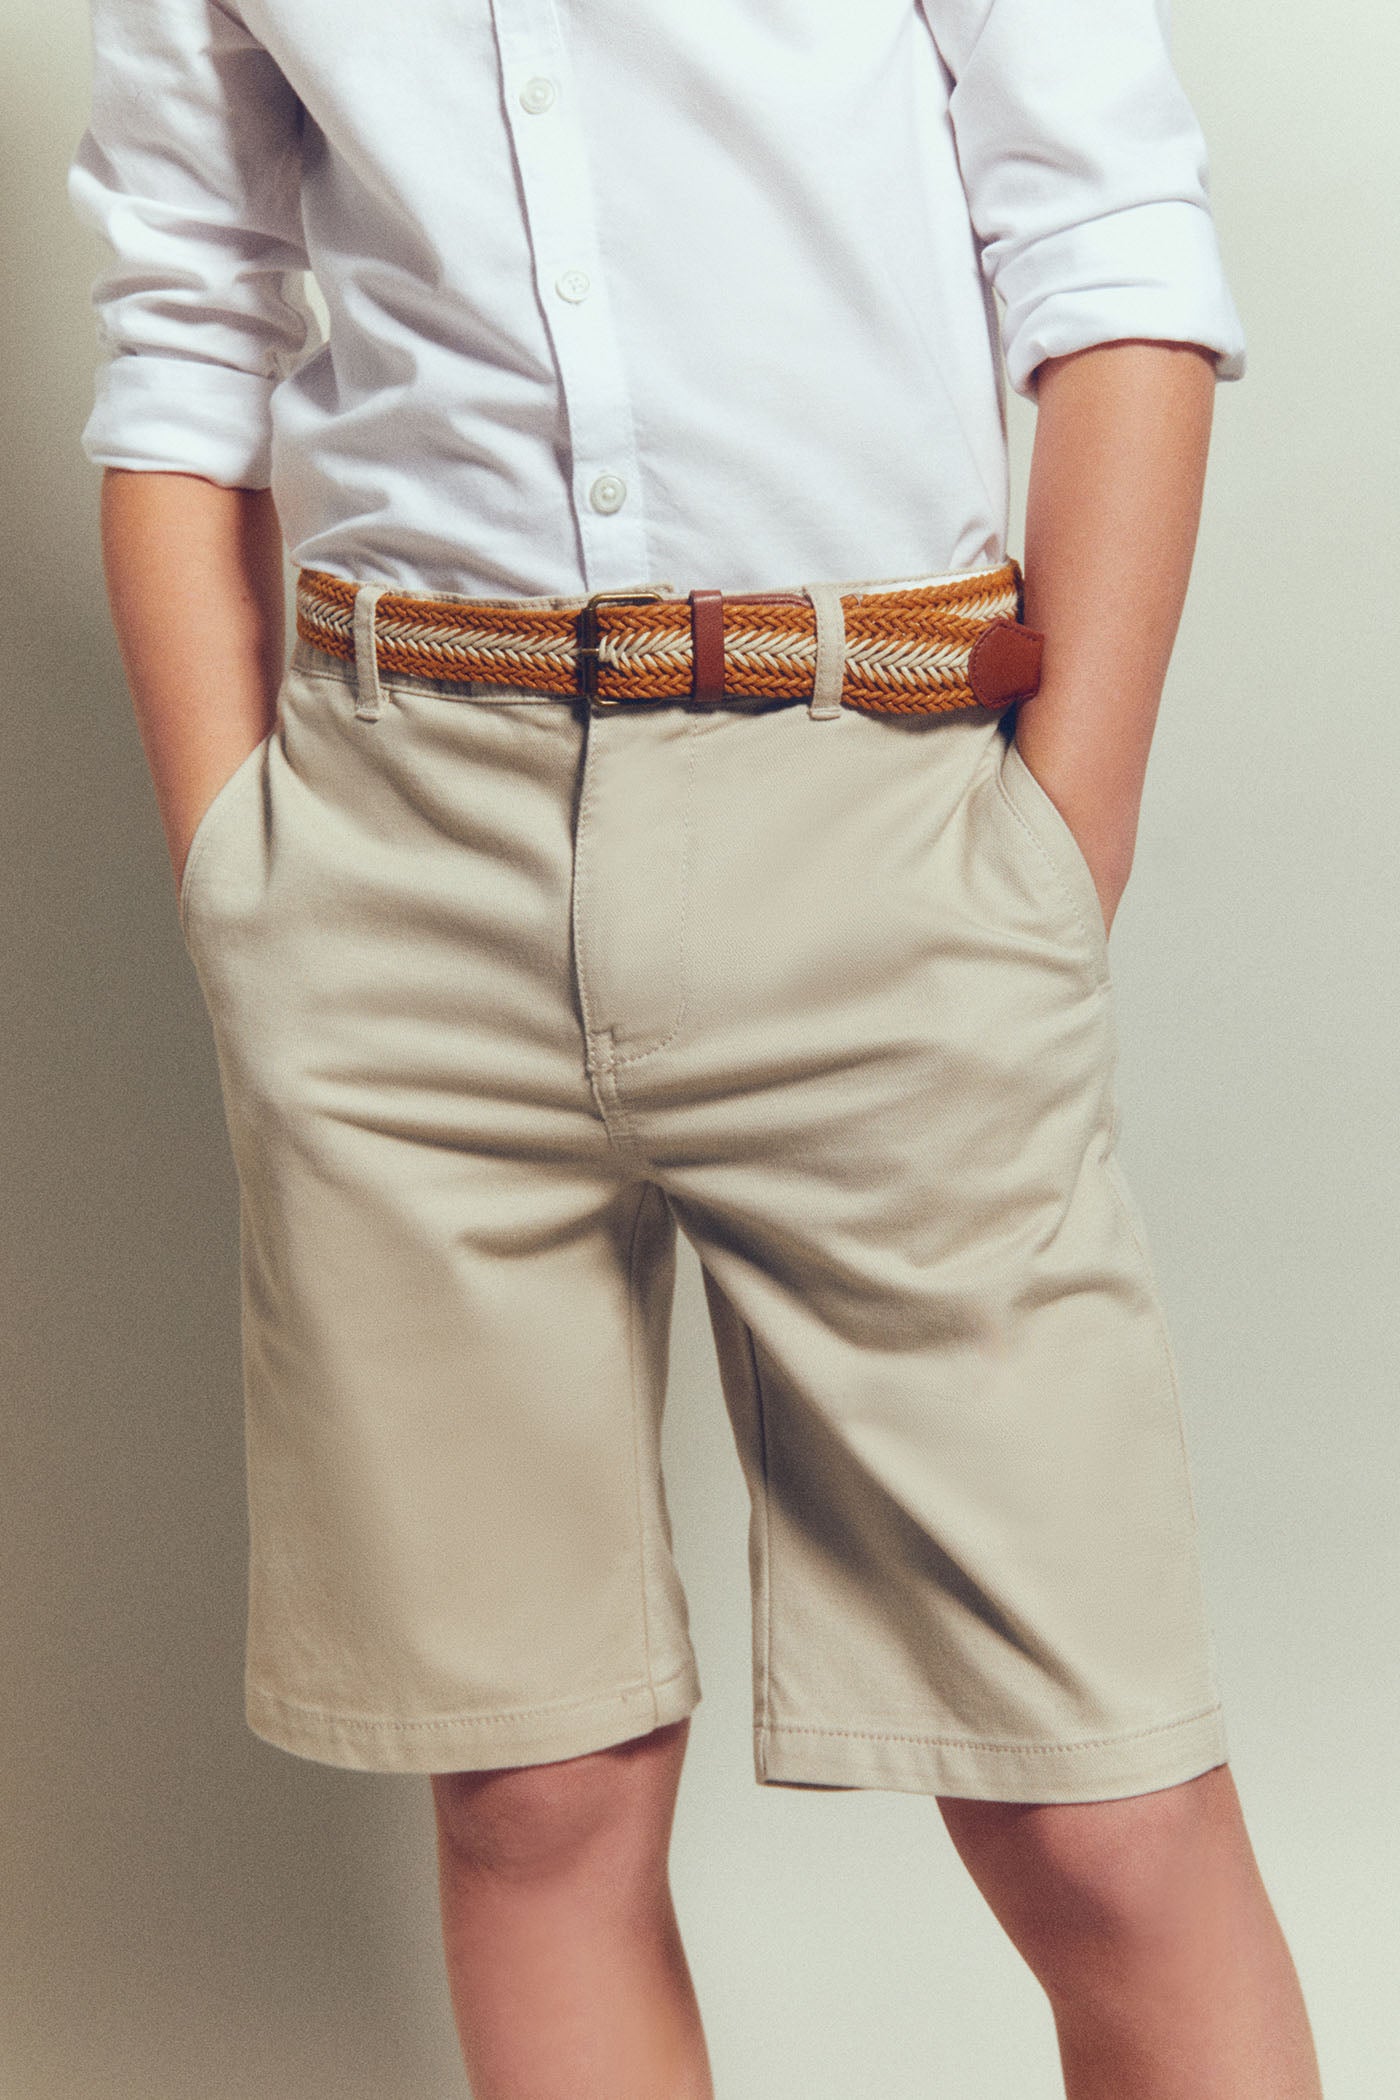 Sfera Formal Shorts With Belt - Beige / Camel 2 Shaws Department Stores